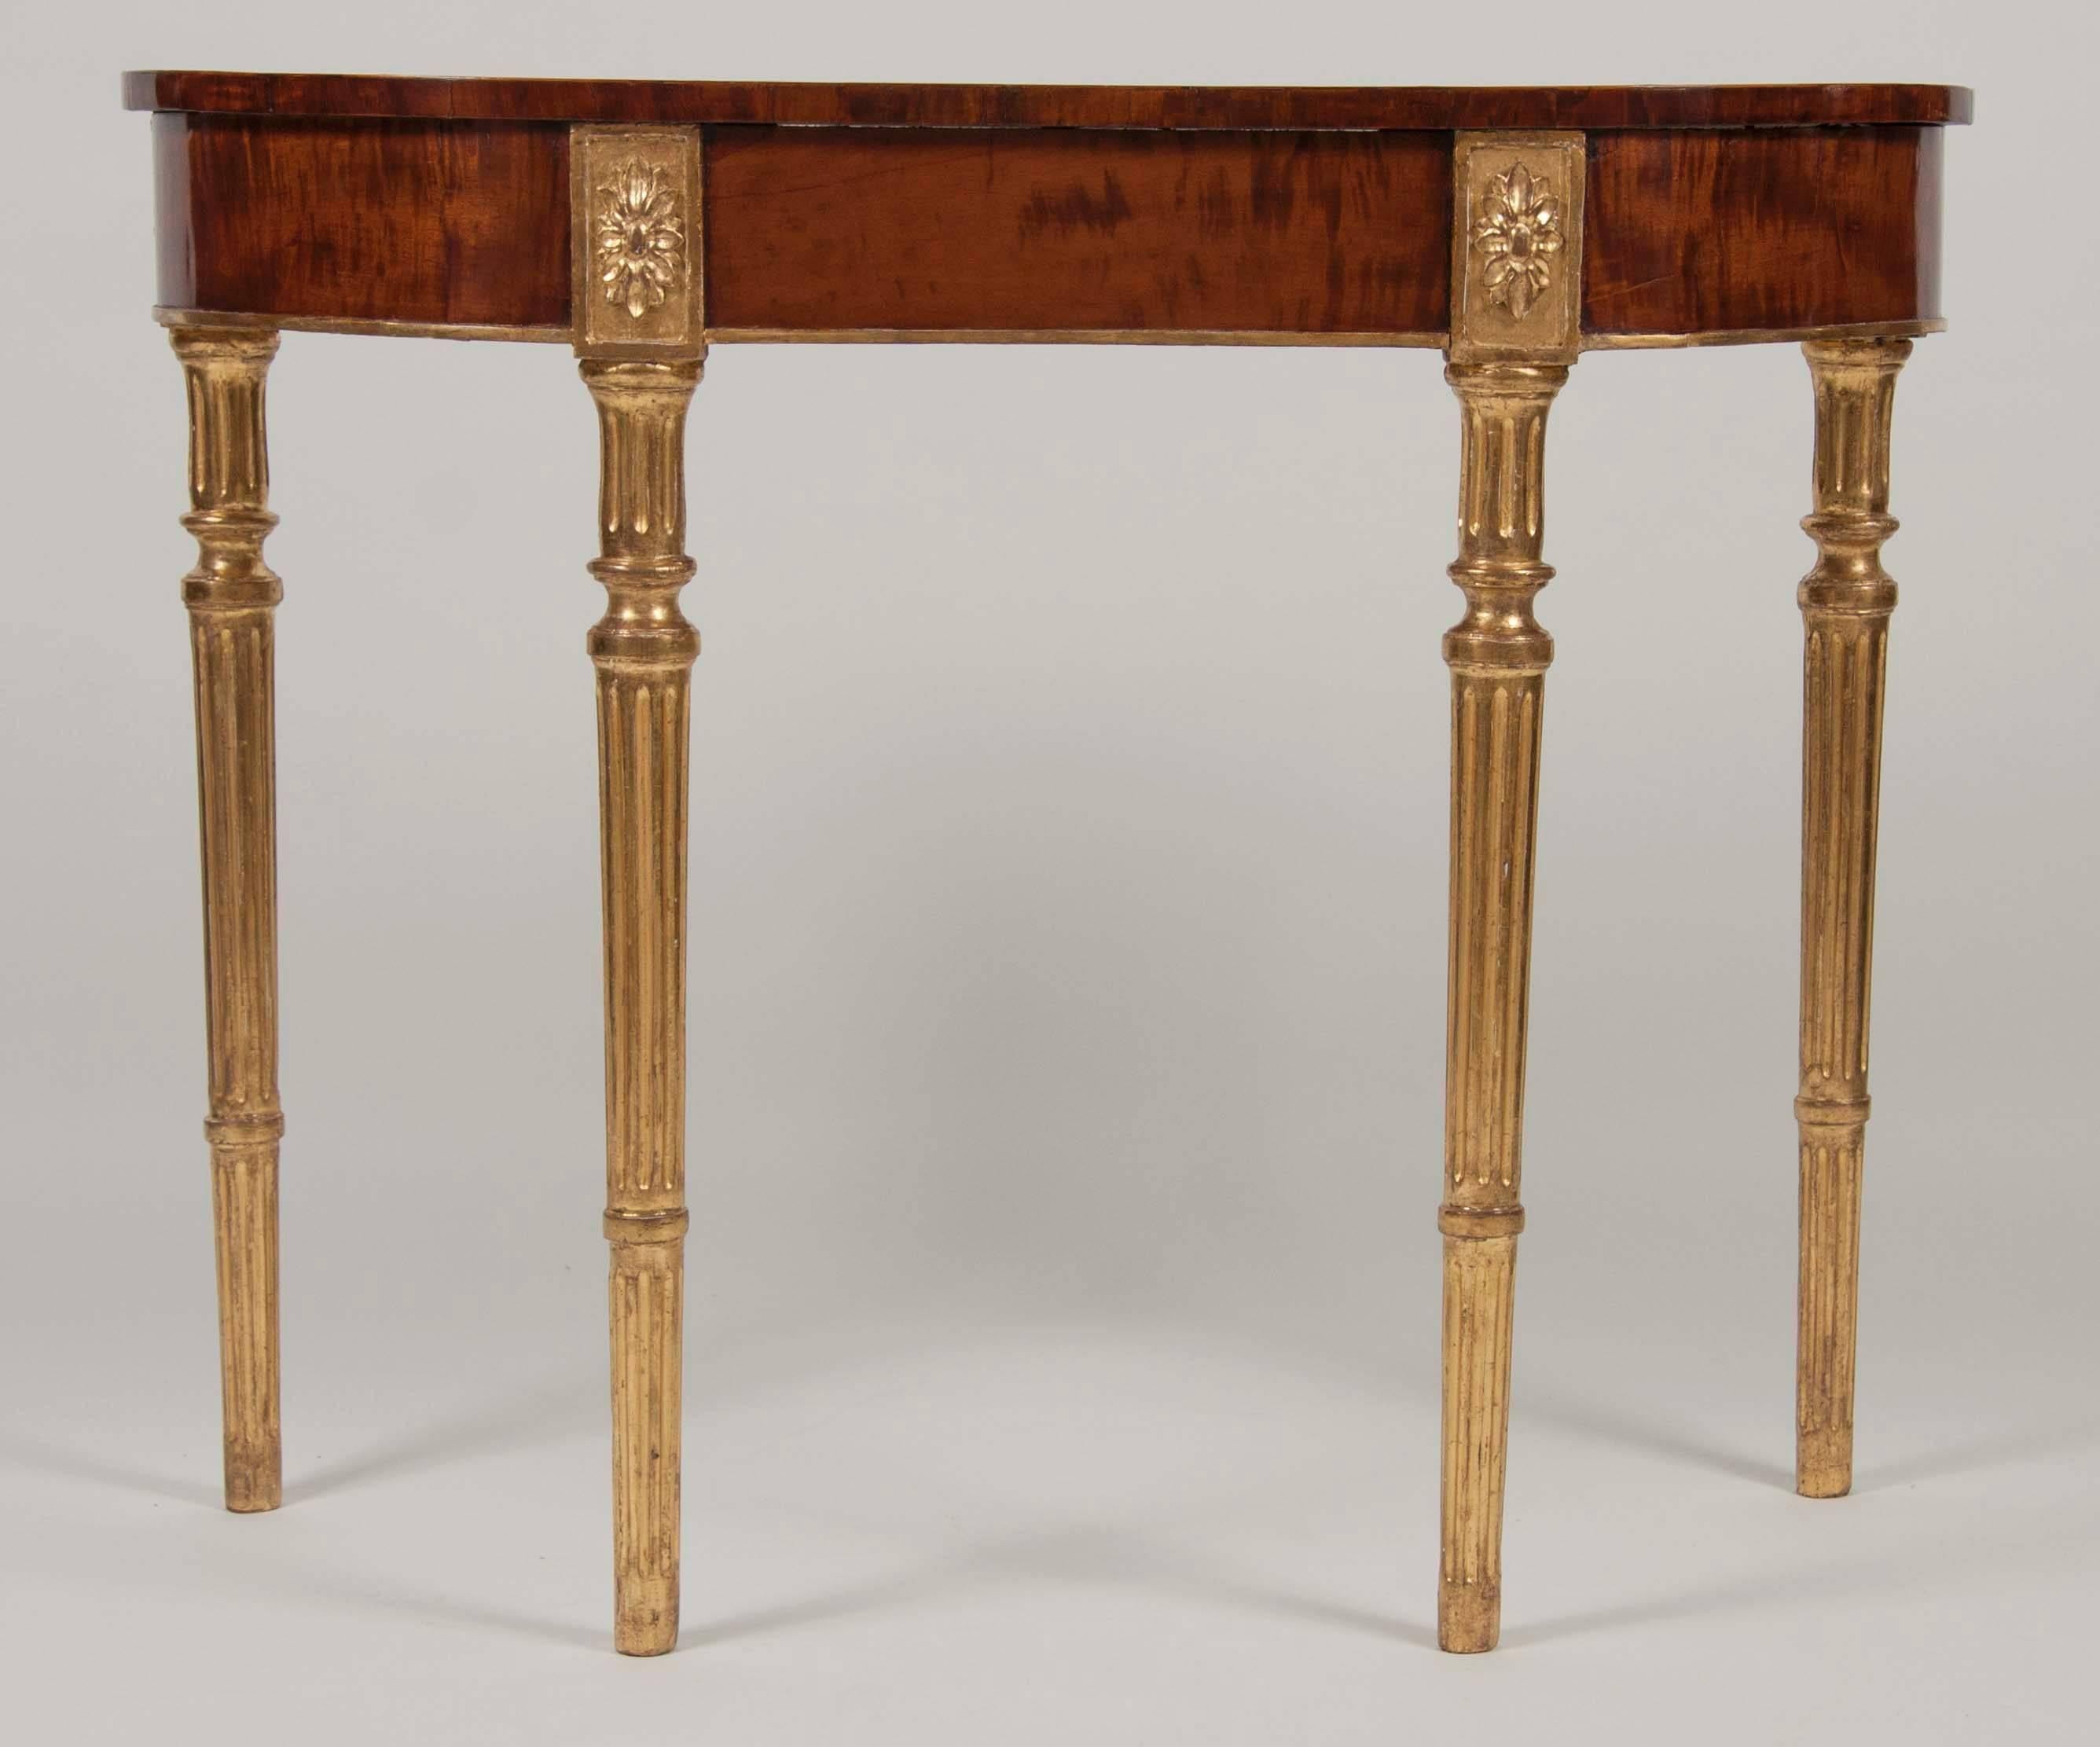 A stunning pair of matched George III period, mahogany and satinwood, parcel-gilt console tables having crossbanded 'D' form tops over gilded tapering, ring turned fluted legs.